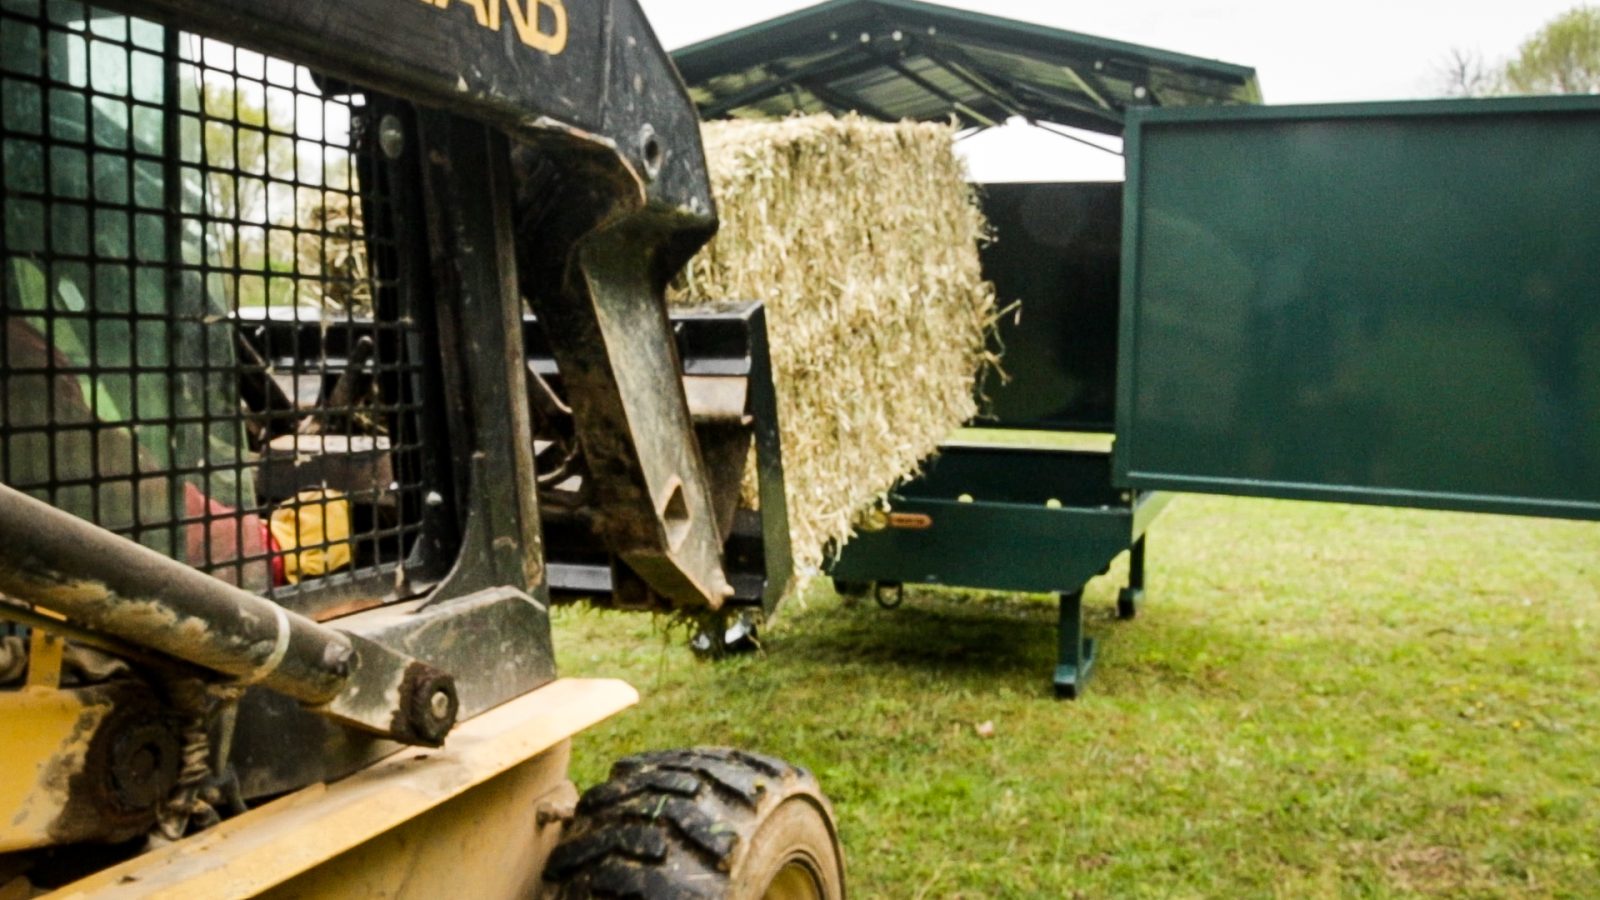 exterior of feeder and hay for horse overeating article